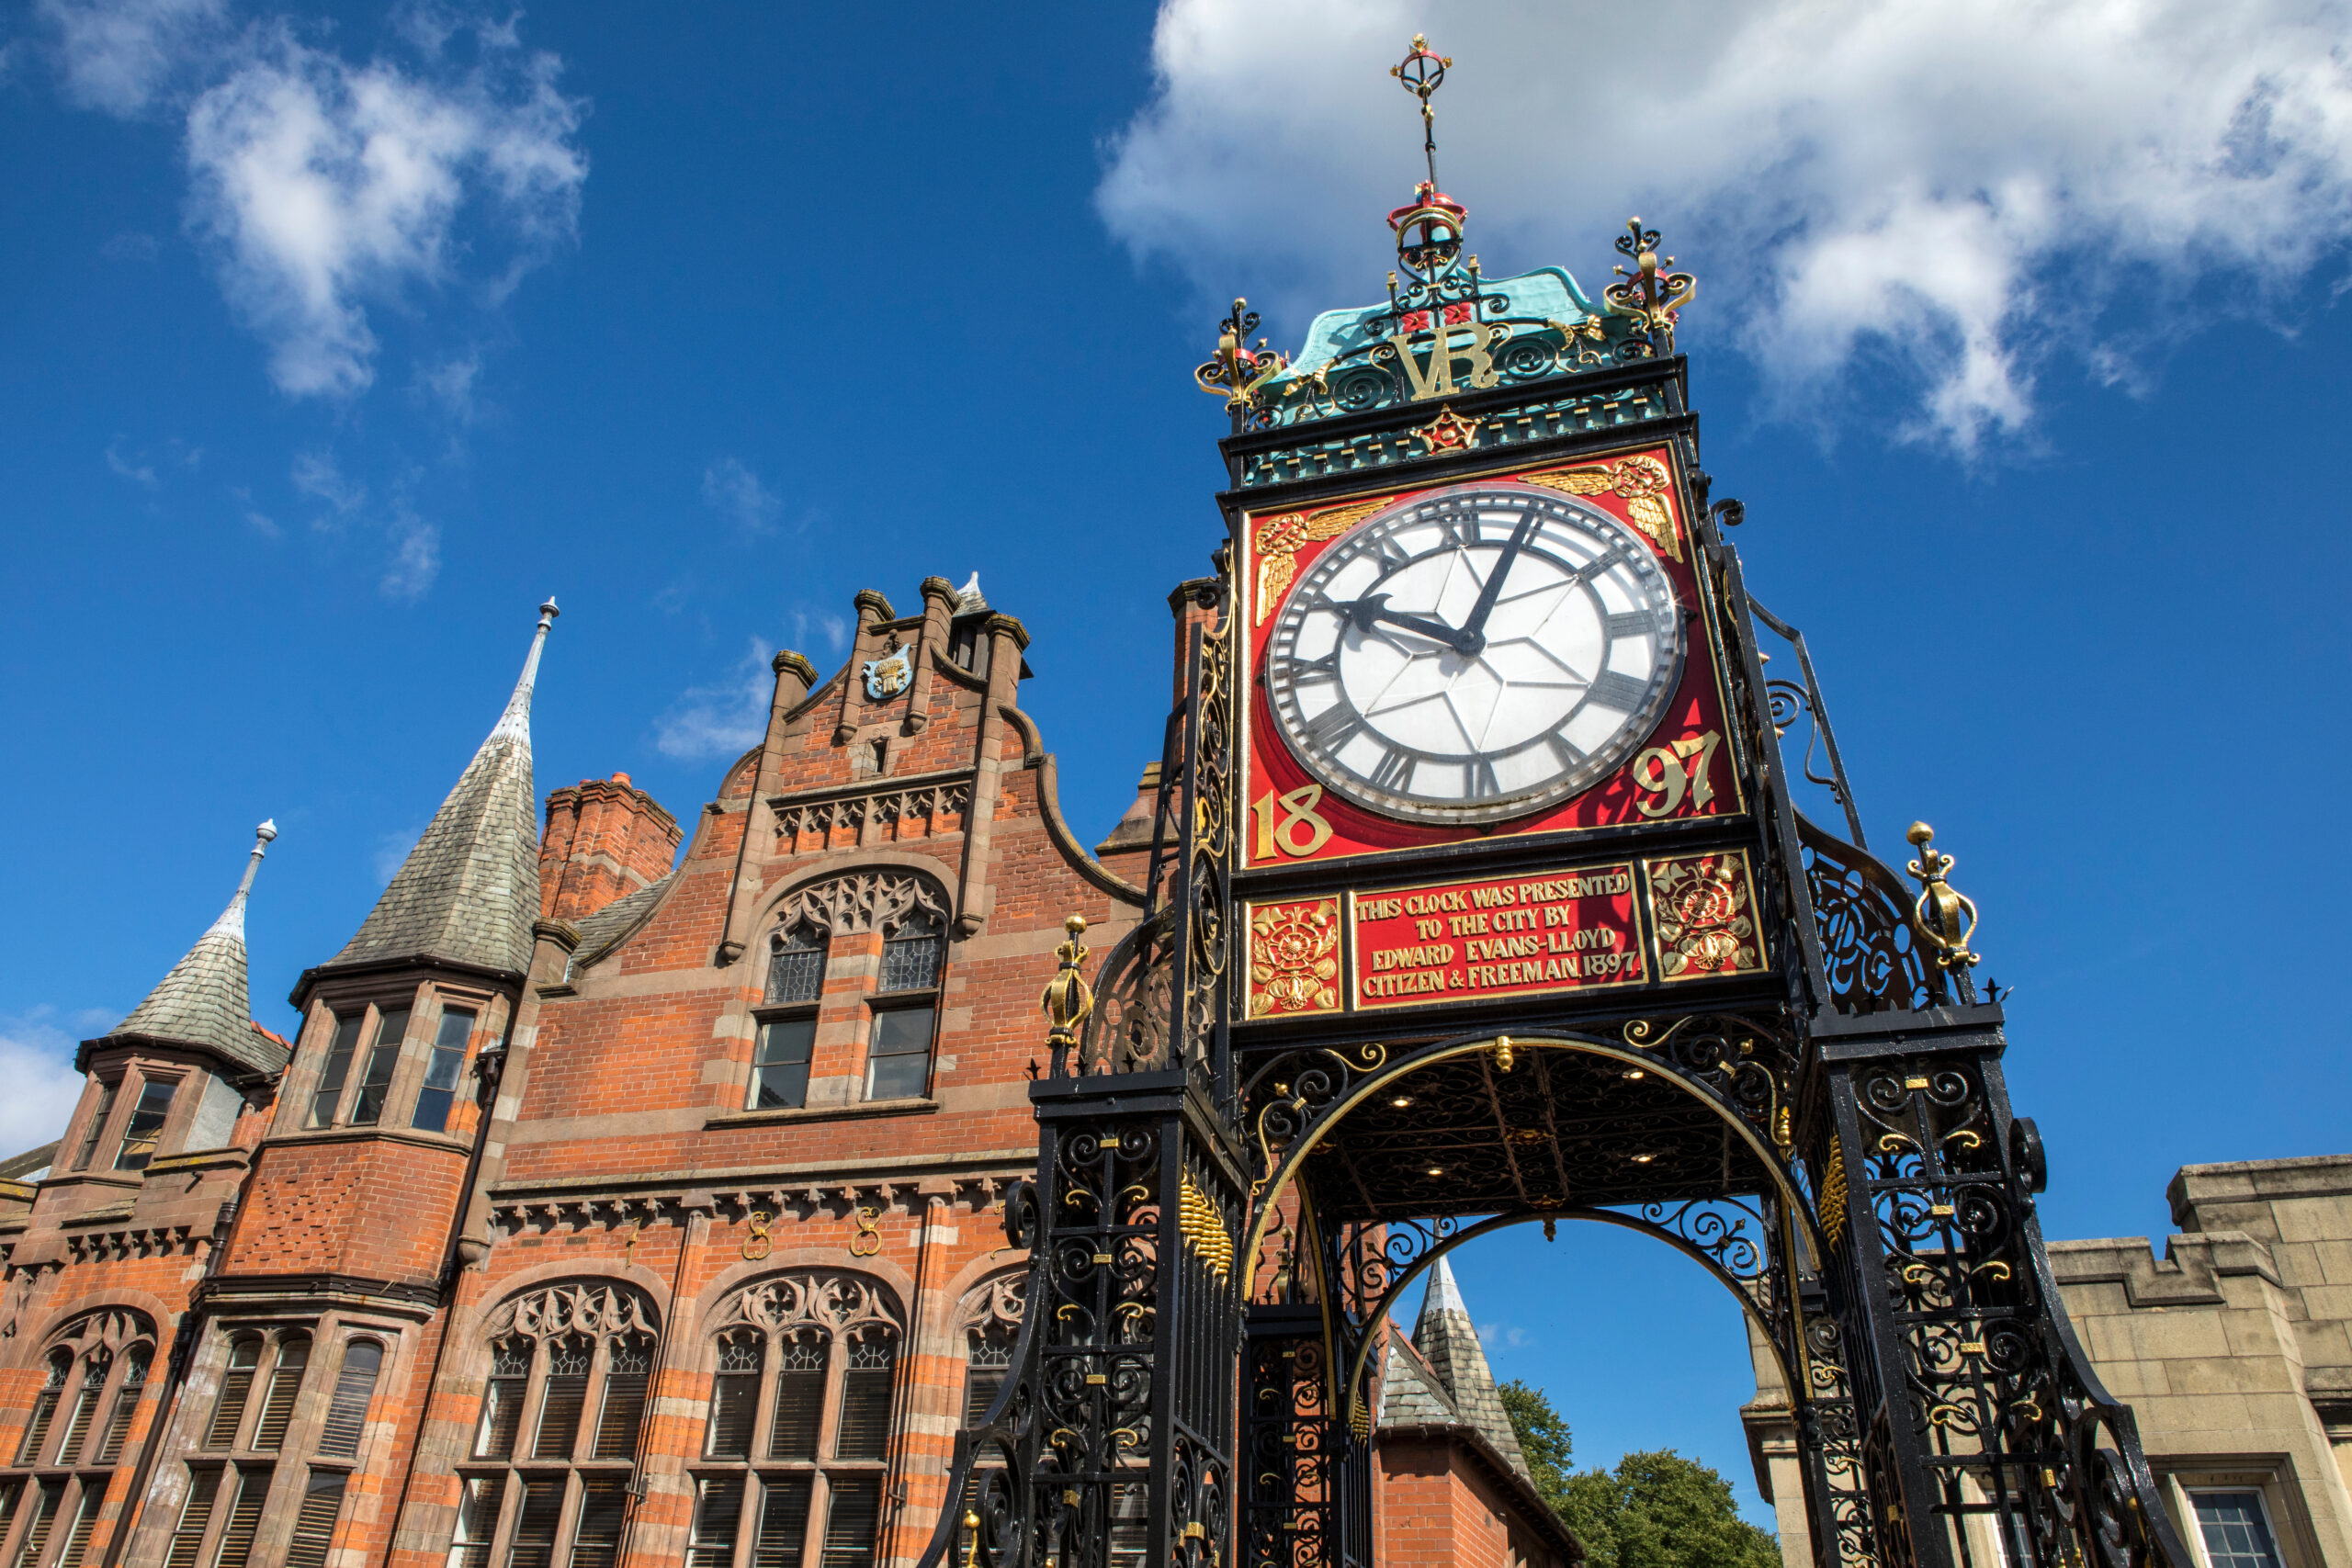 The famous Eastgate Clock, viewed from the historic city walls in the city of Chester, UK.